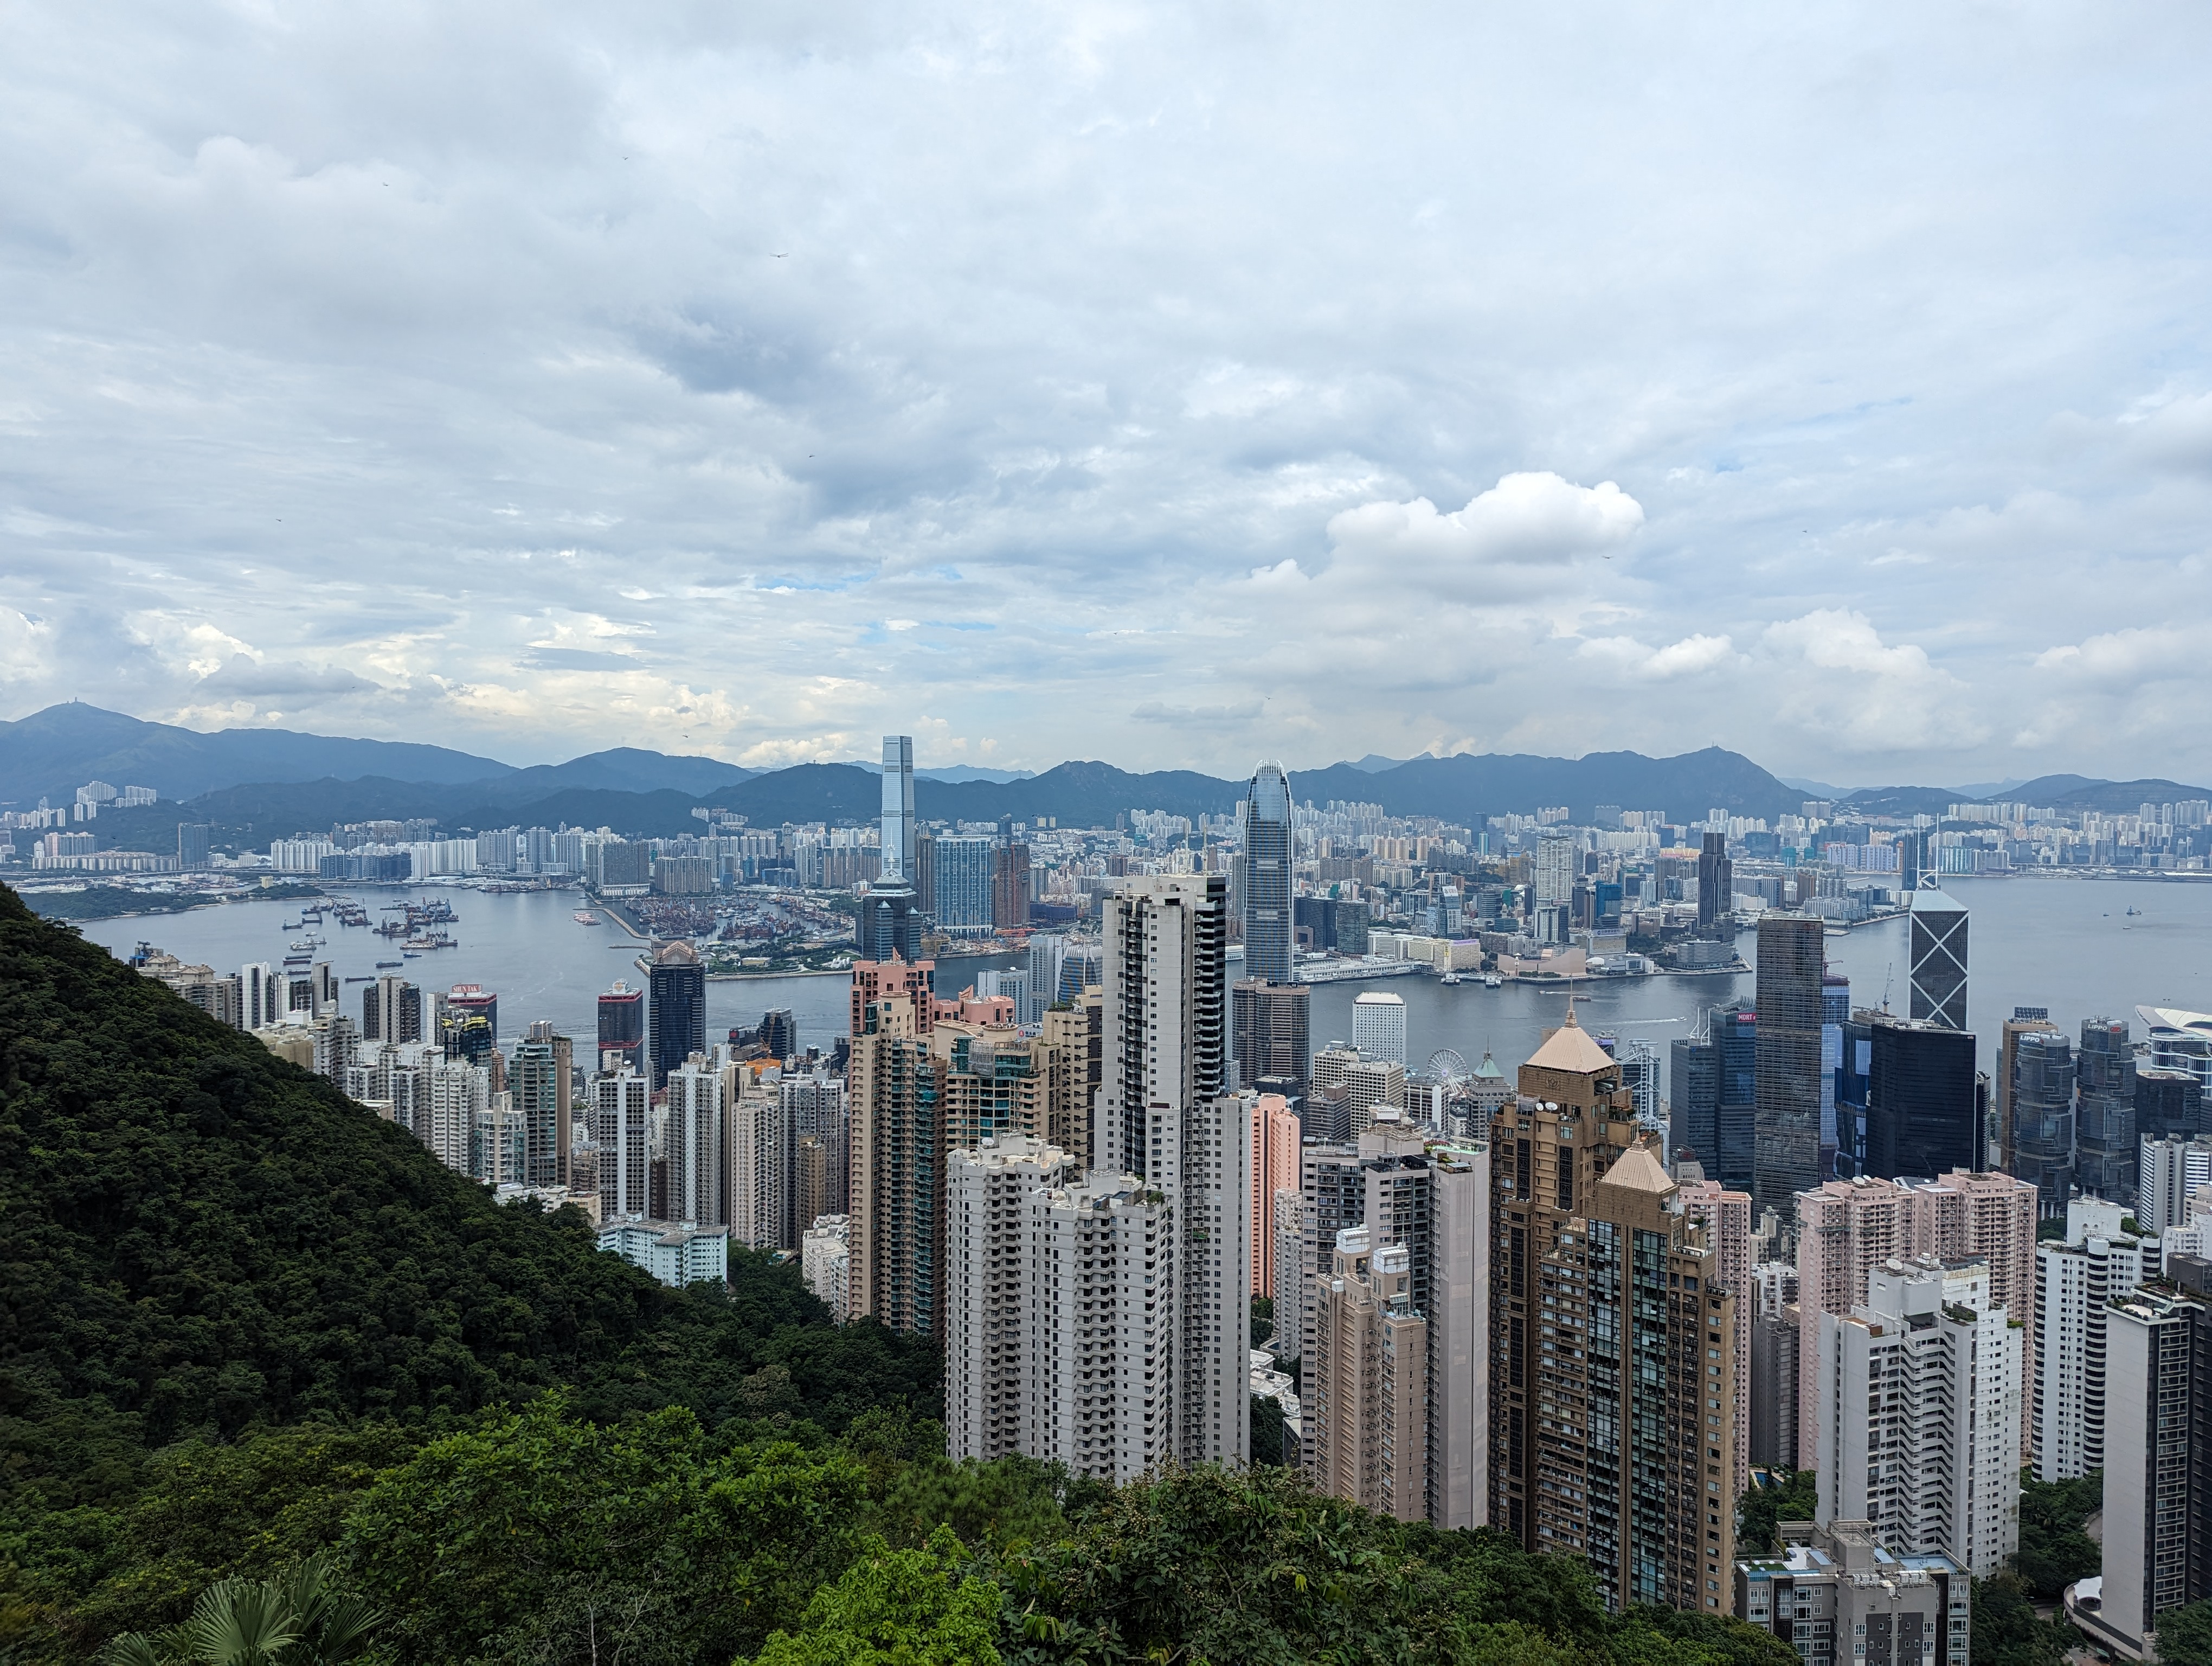 Ultimate 5-day trip to Hong Kong from Singapore